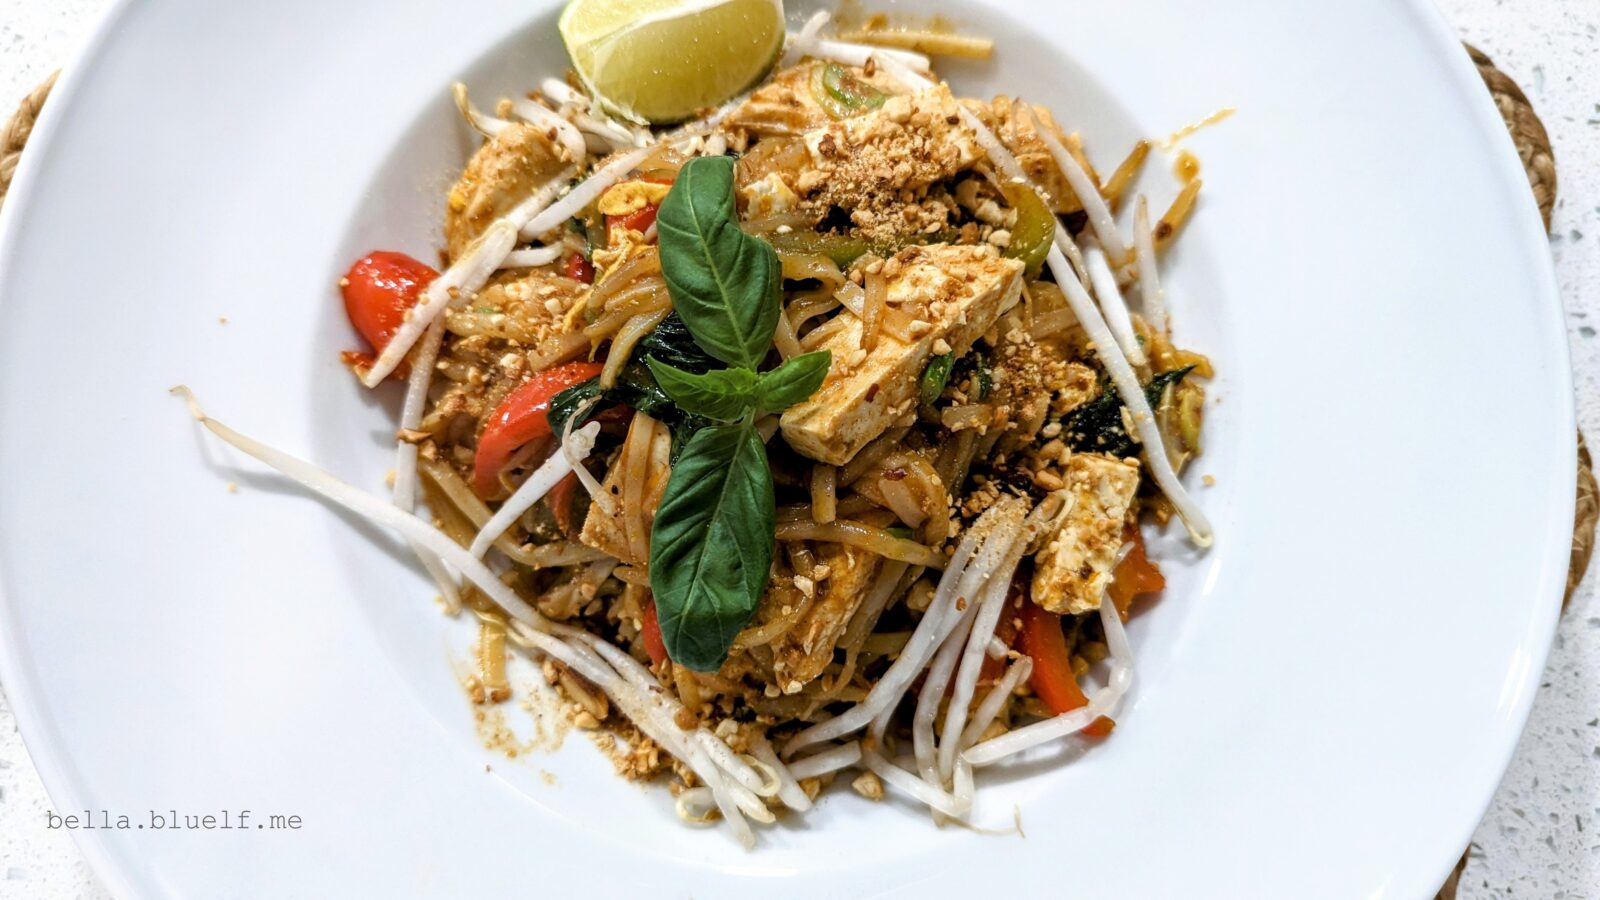 Craving Pad Thai that Bursts with Flavor and Doesn't Break the Bank?